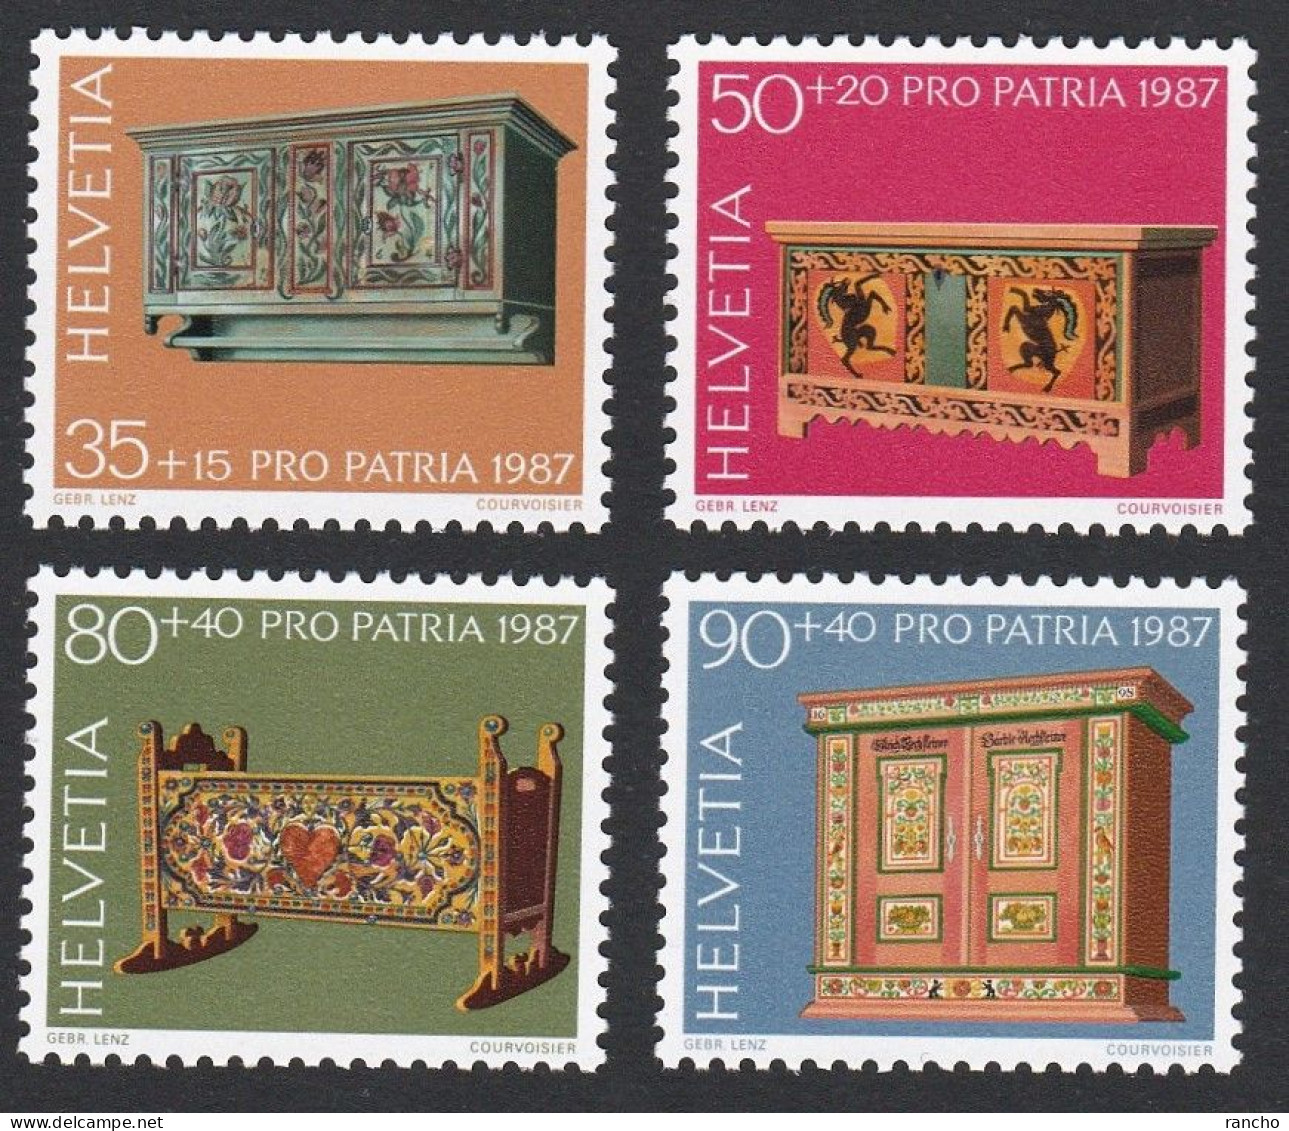 ** PRO/P. 1987. COLLECTION SERIE TIMBRES NEUFS A/GOMME C/.S.B.K. Nr:B215/18. Y&TELLIER Nr:1276/79. MICHEL Nr:1345/48.** - Ongebruikt